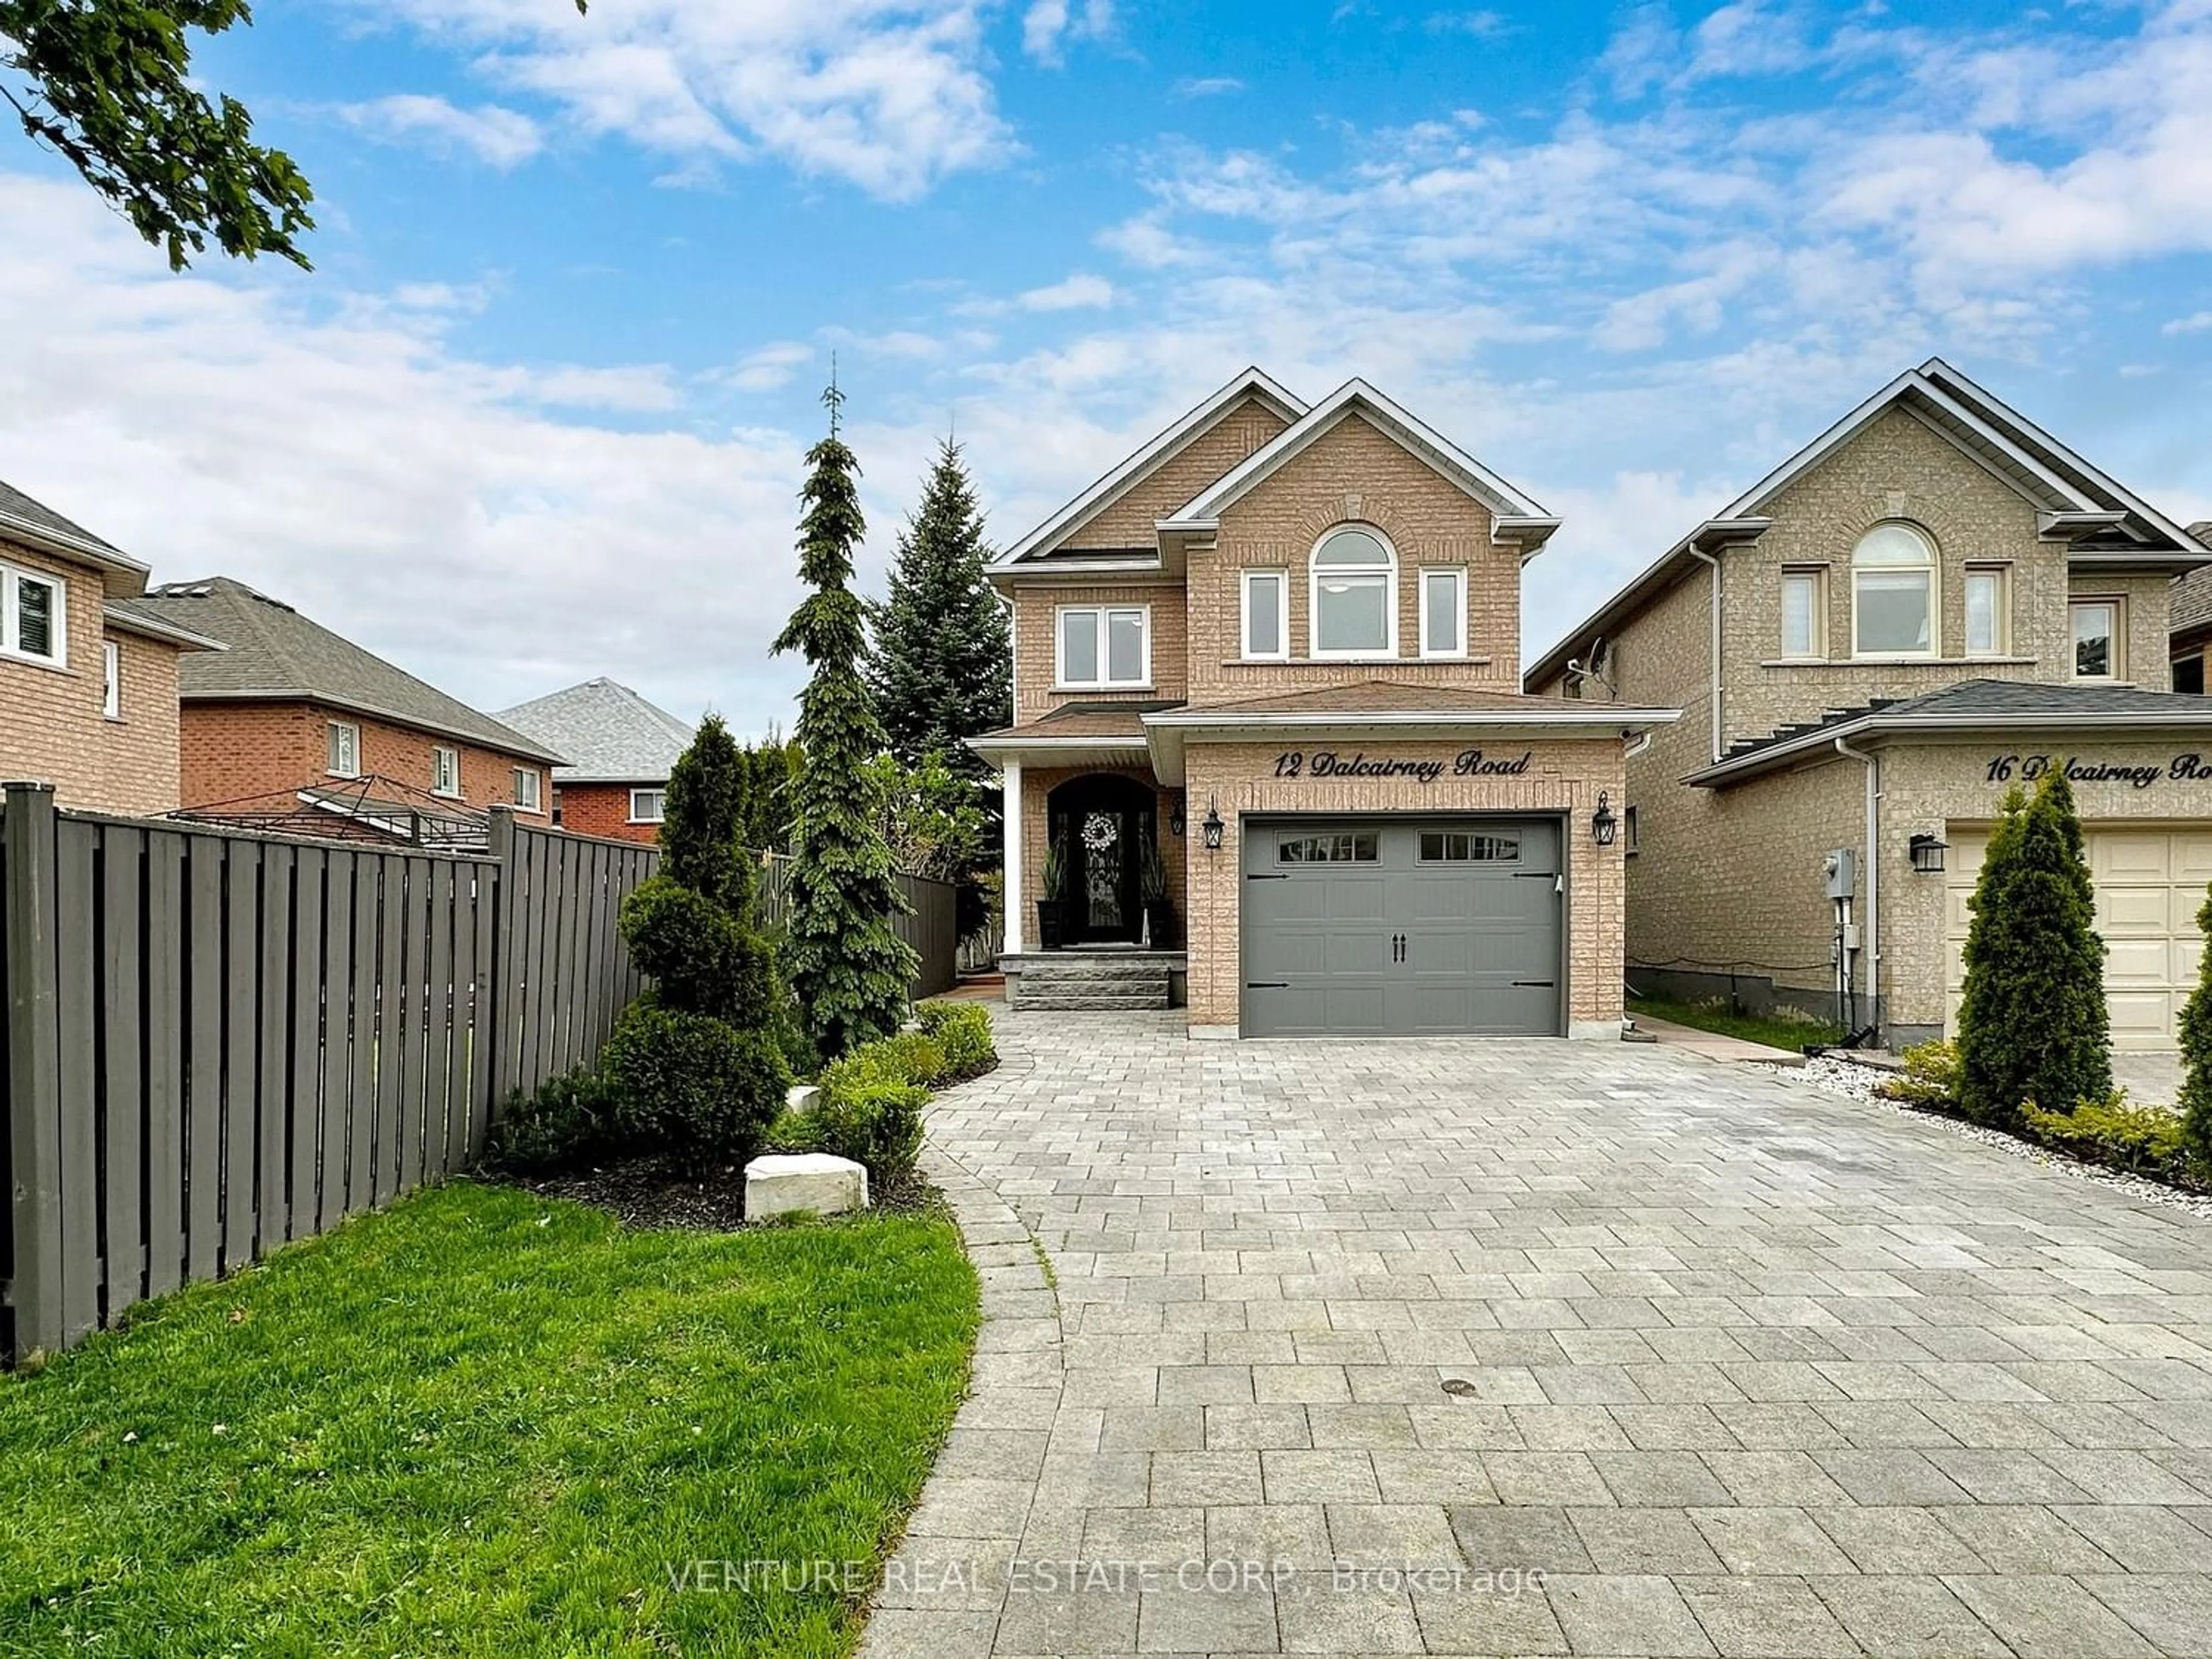 Home with brick exterior material for 12 Dalcairney Rd, Vaughan Ontario L6A 2J4